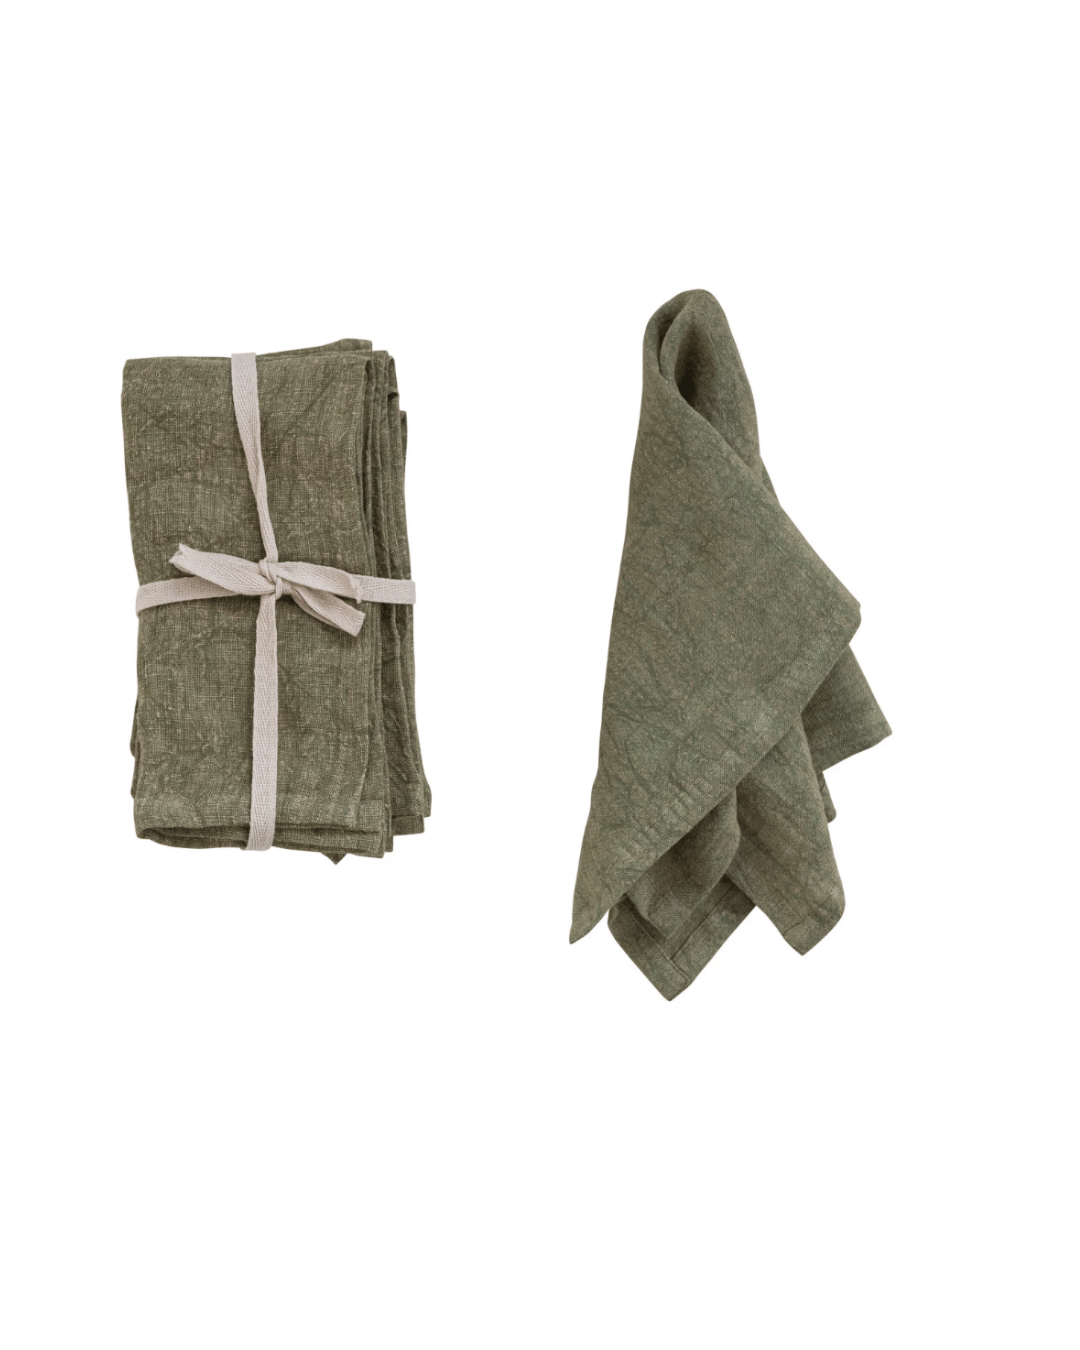 Two Stonewashed Linen Napkins by Creative Co-op on a white background in a Scottsdale bungalow; one neatly folded and tied with a ribbon, the other casually draped and partially unfolded.